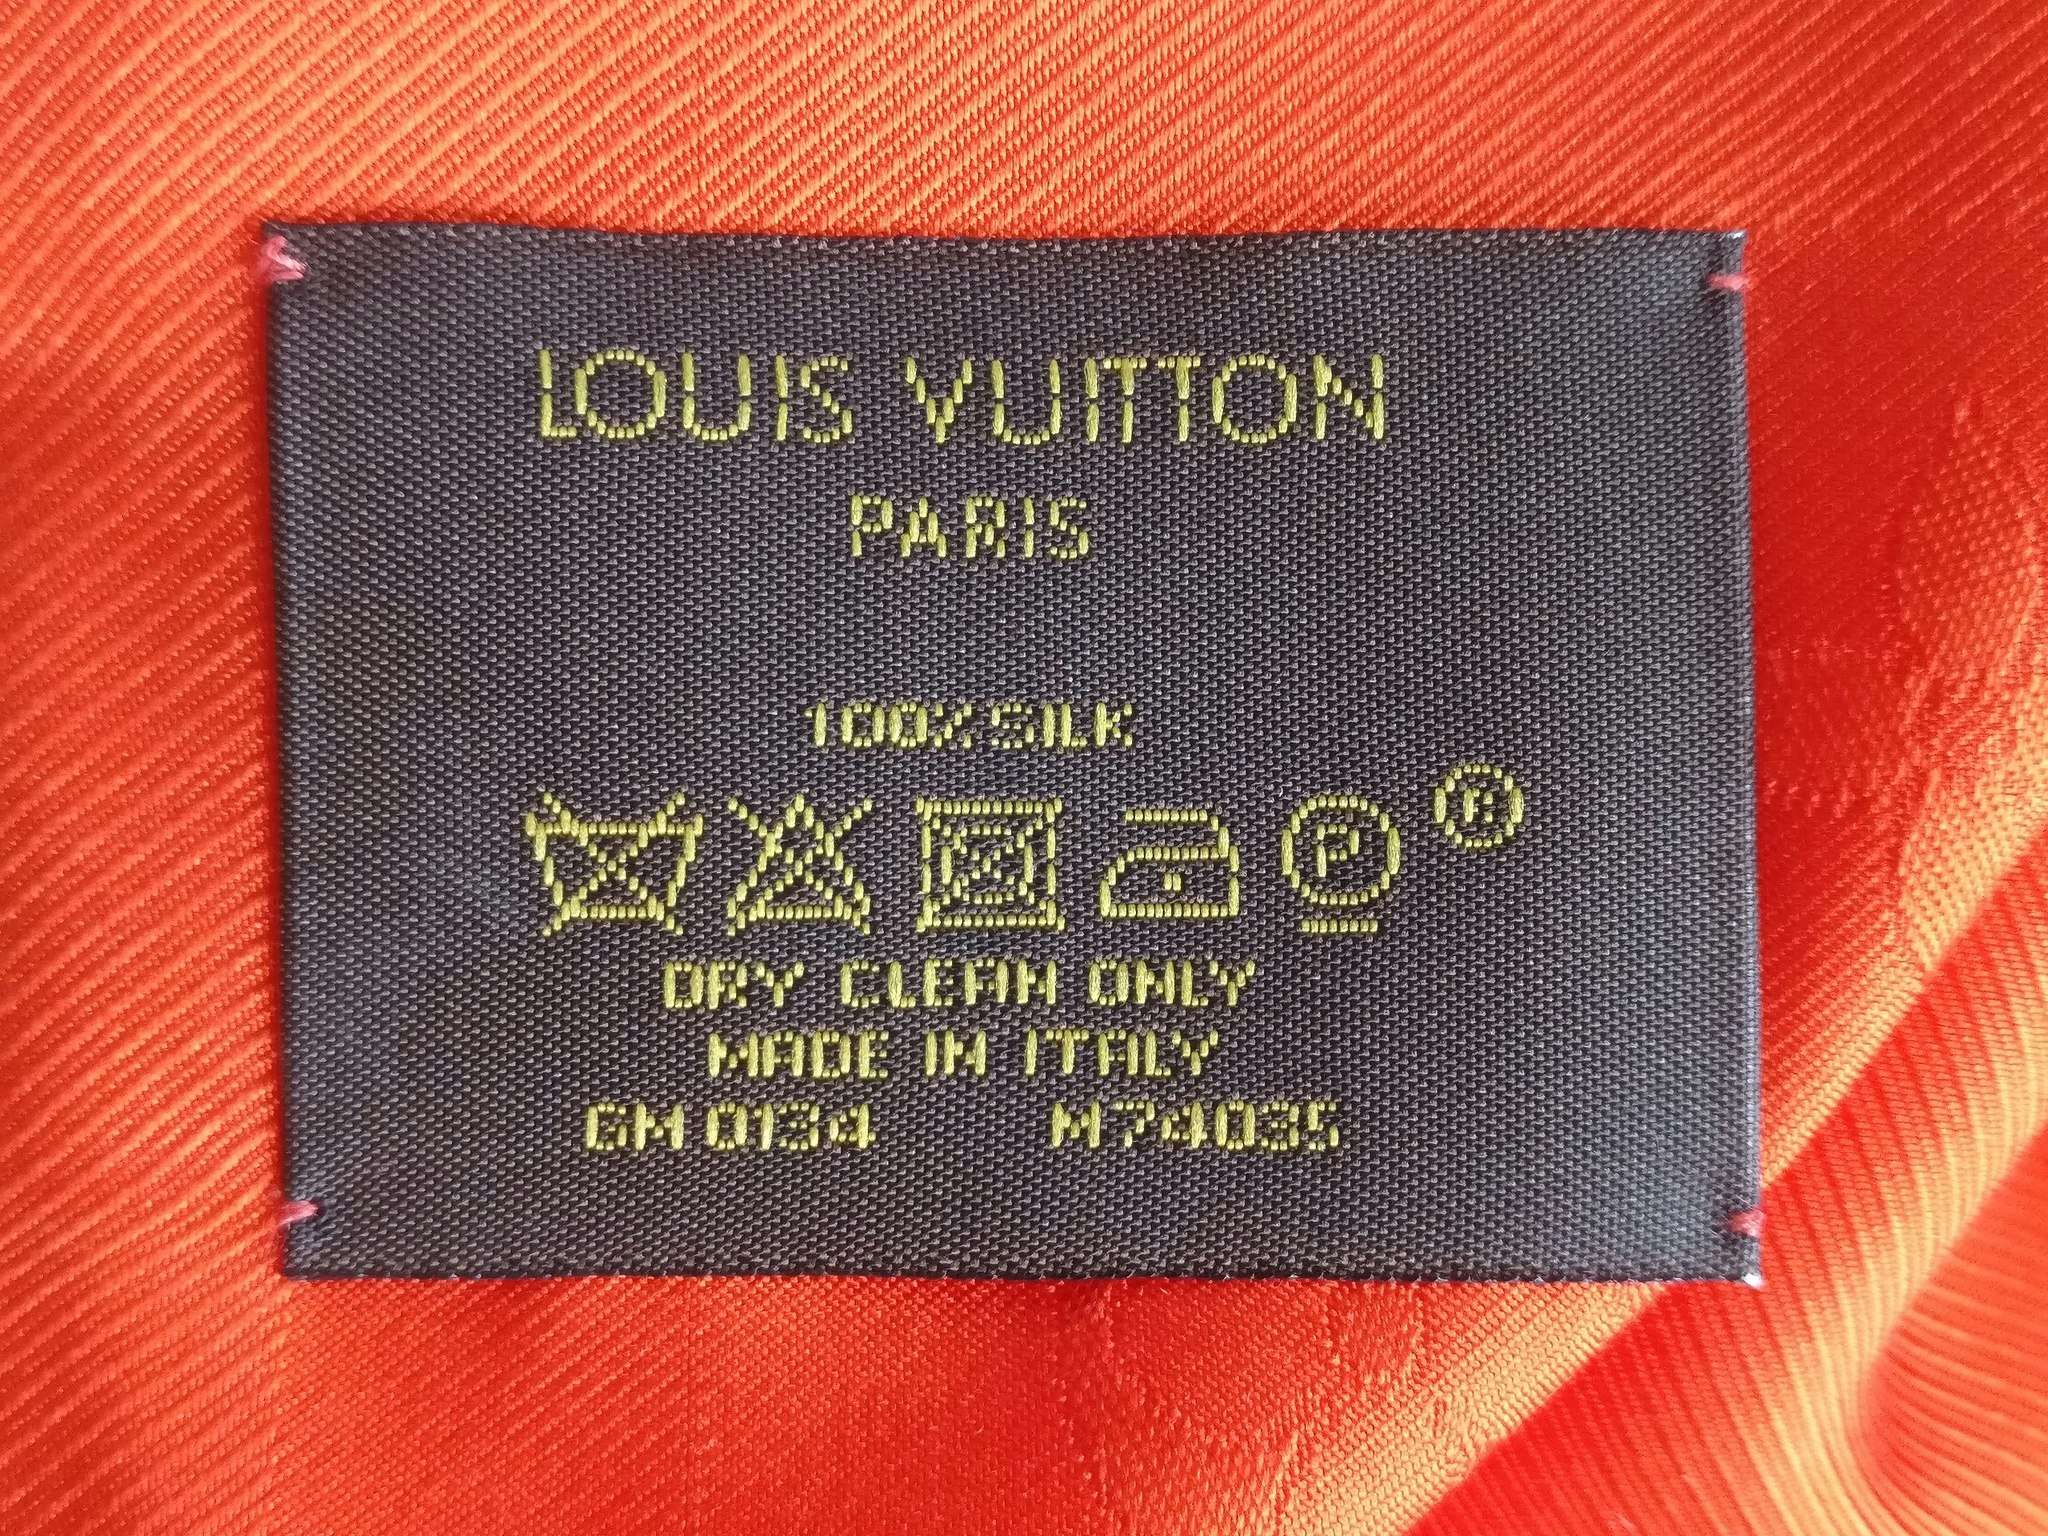 Louis Vuitton Silk Scarf Monogram, Clean, With Tags